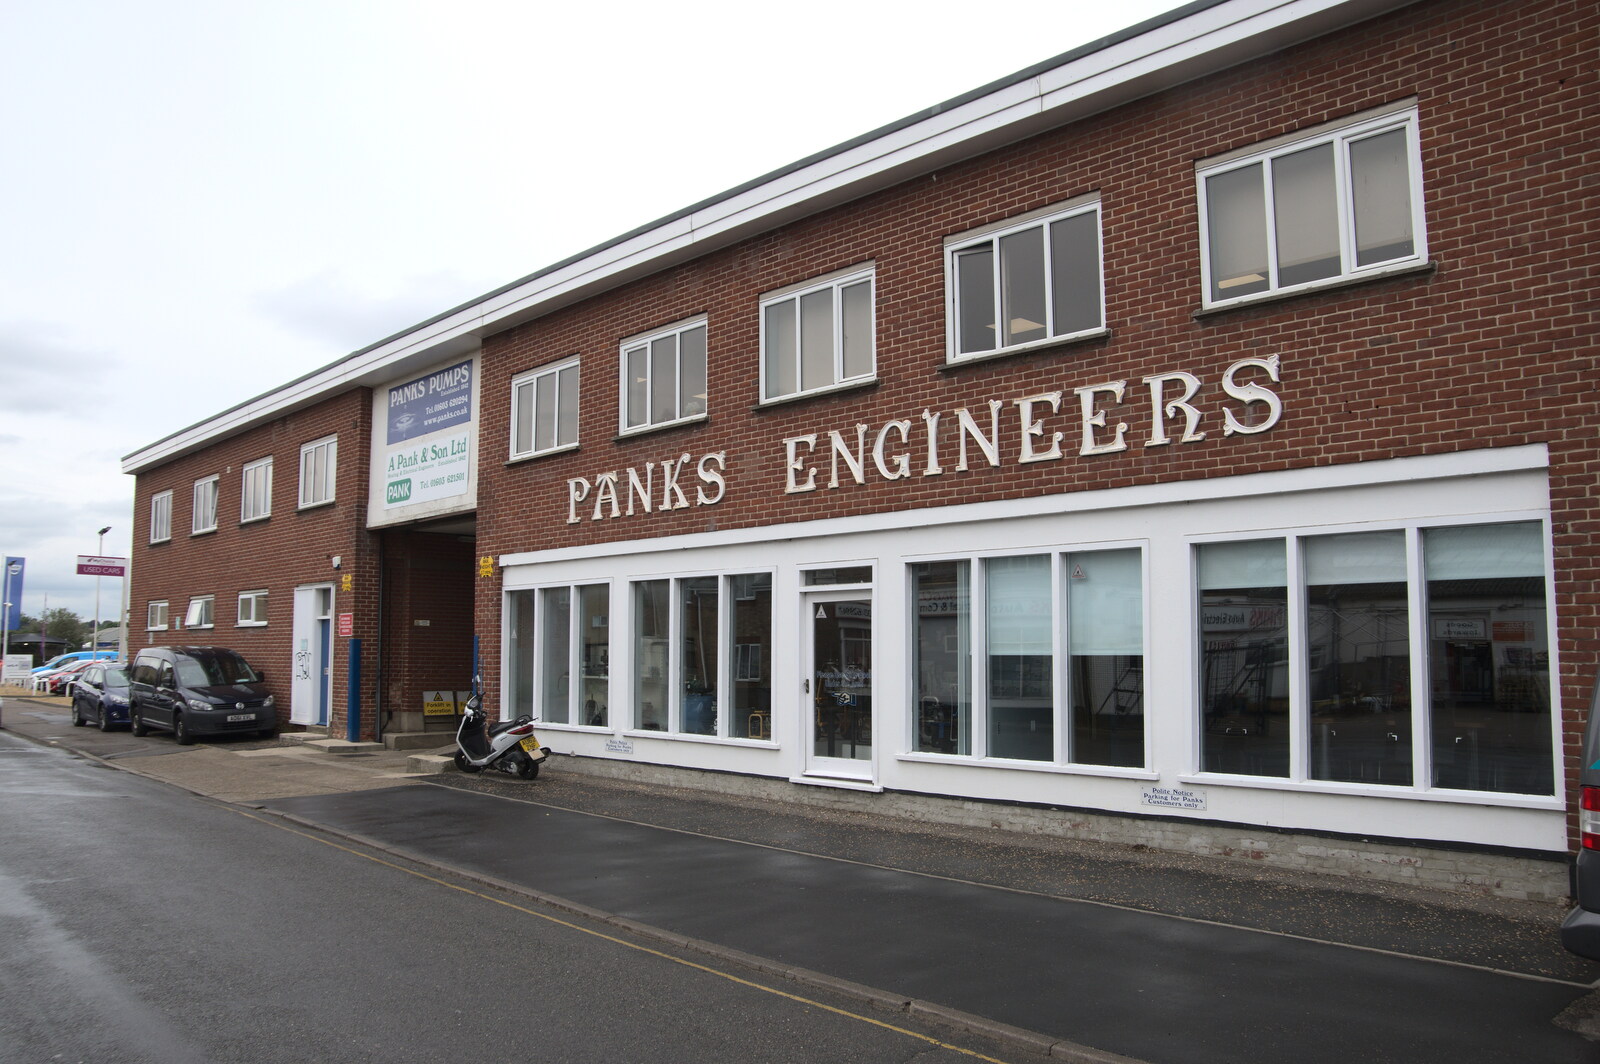 Panks Engineers, unchanged since the 1980s from Discovering the Hidden City: Norwich, Norfolk - 23rd May 2022